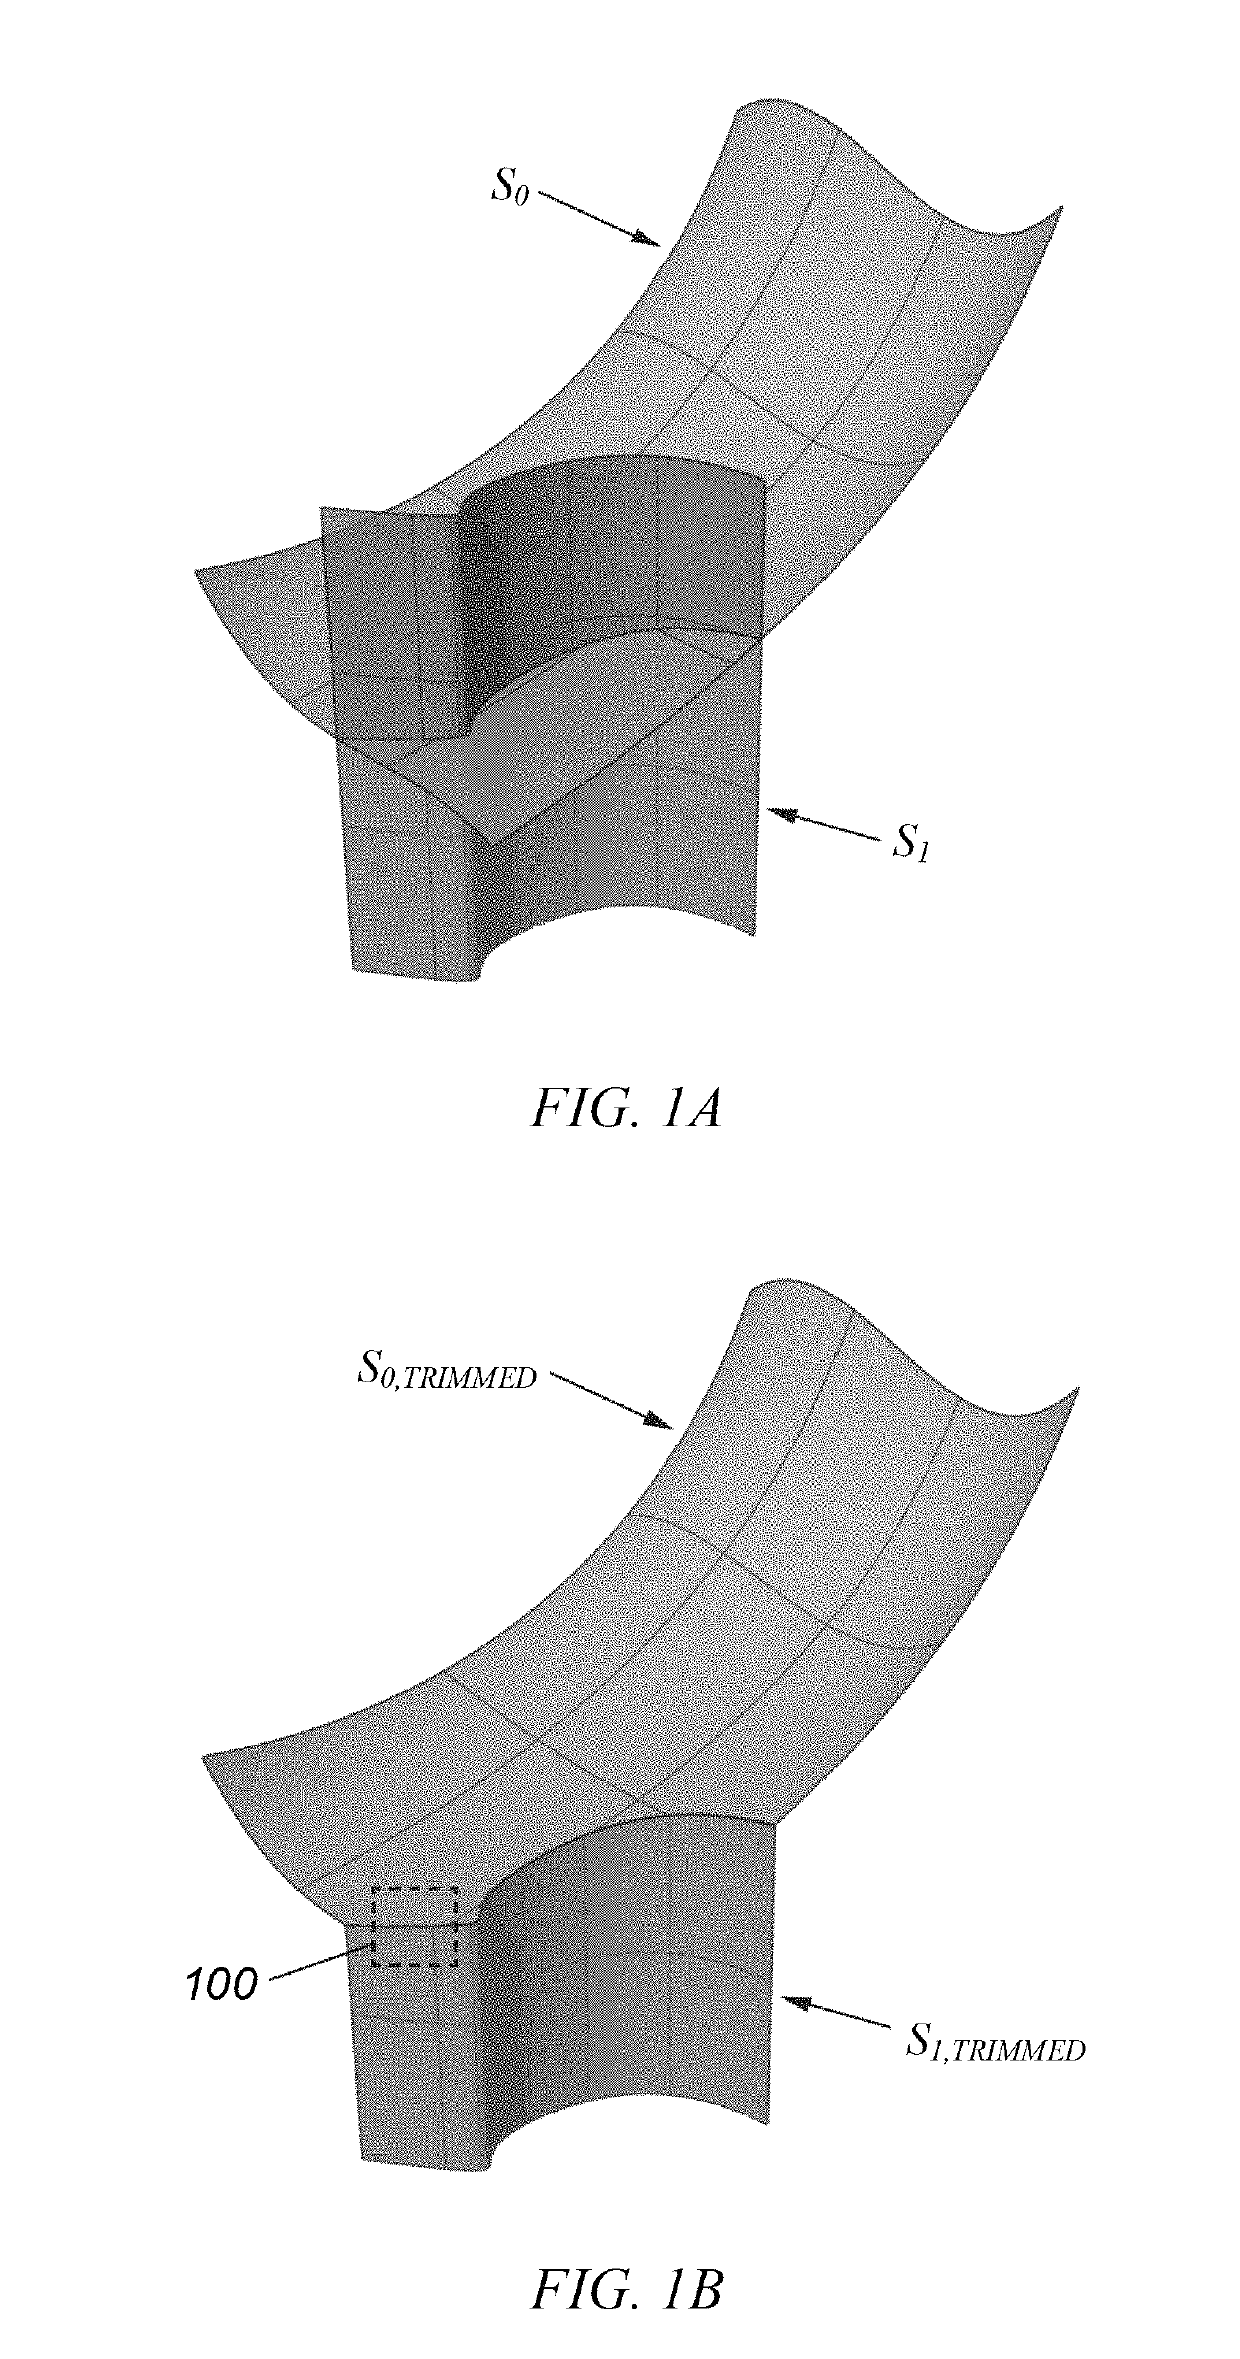 Mechanisms for constructing spline surfaces to provide inter-surface continuity